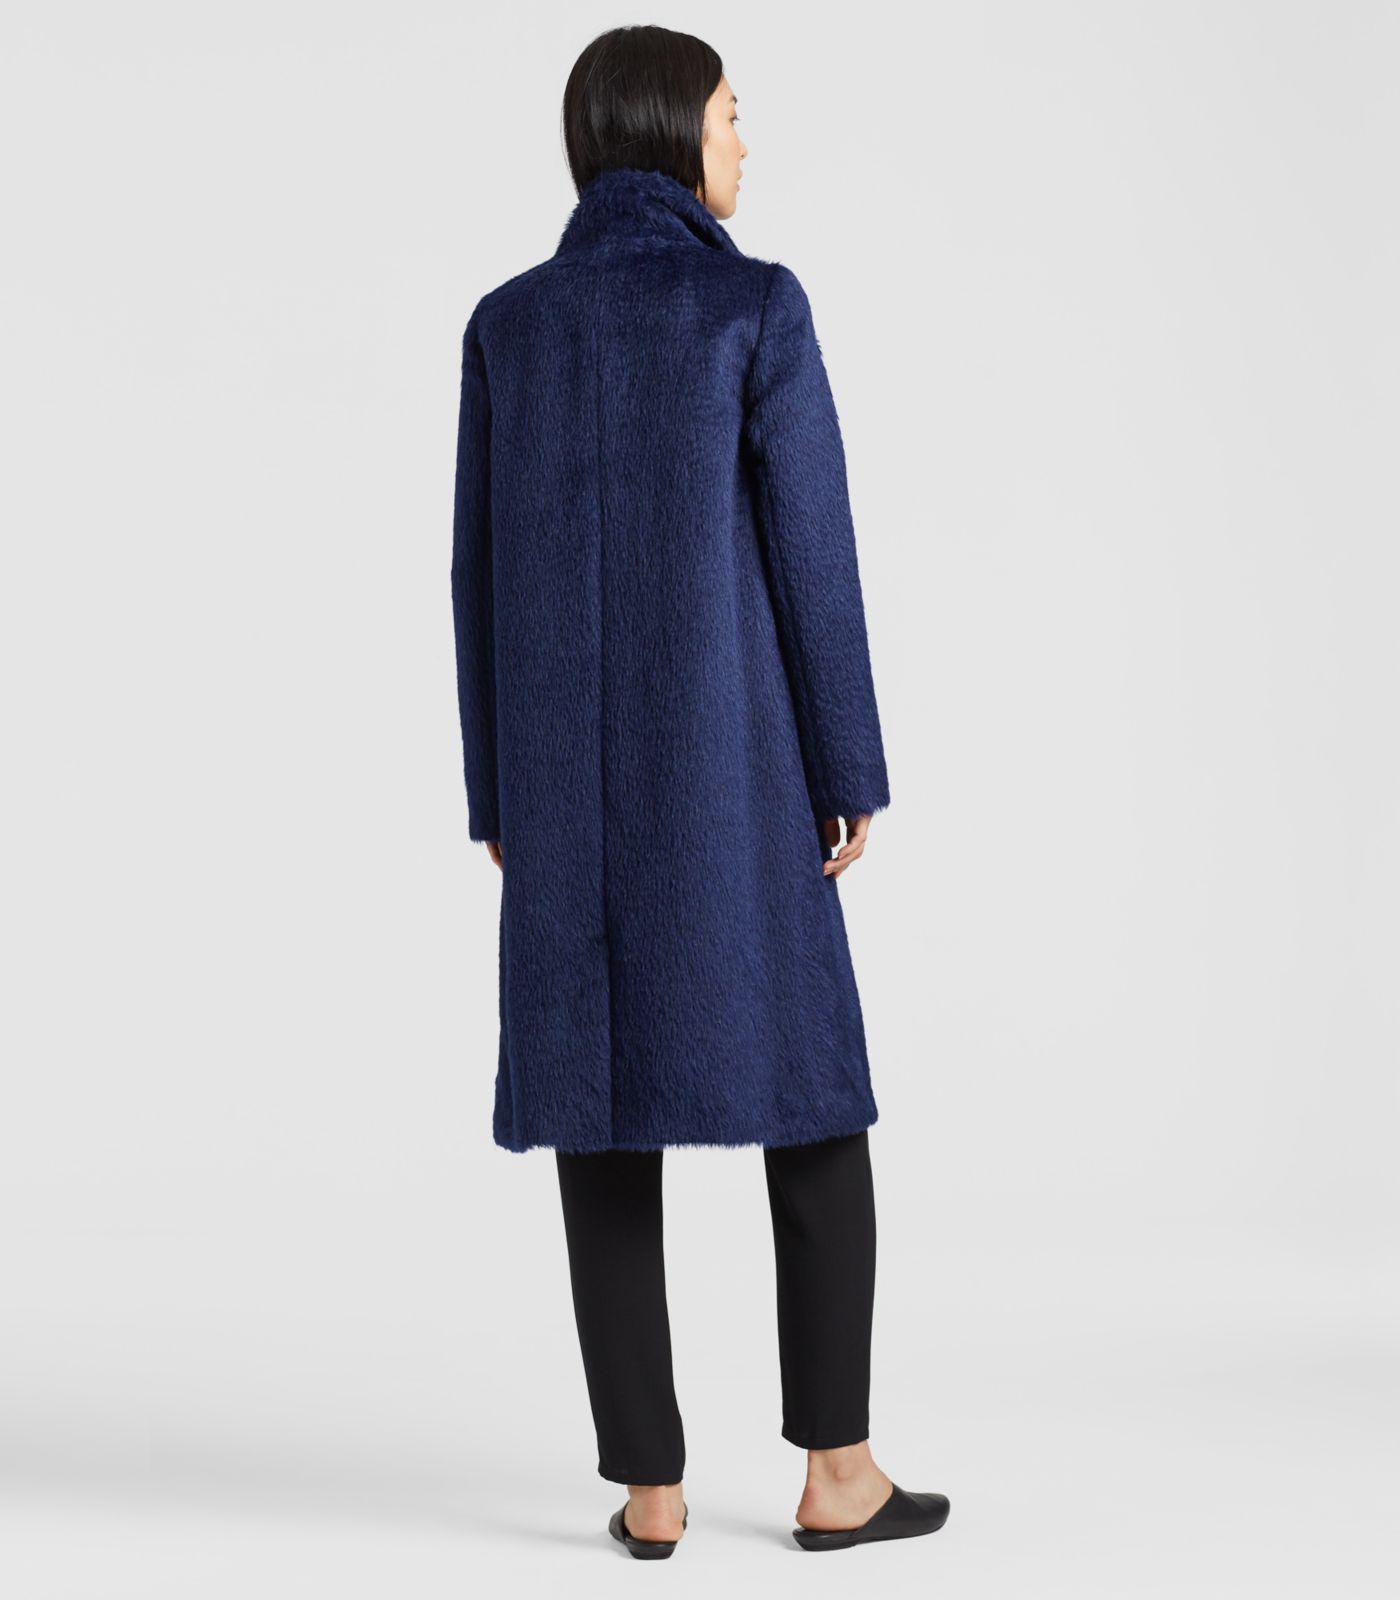 eileen fisher coats,Limited Time Offer,slabrealty.com